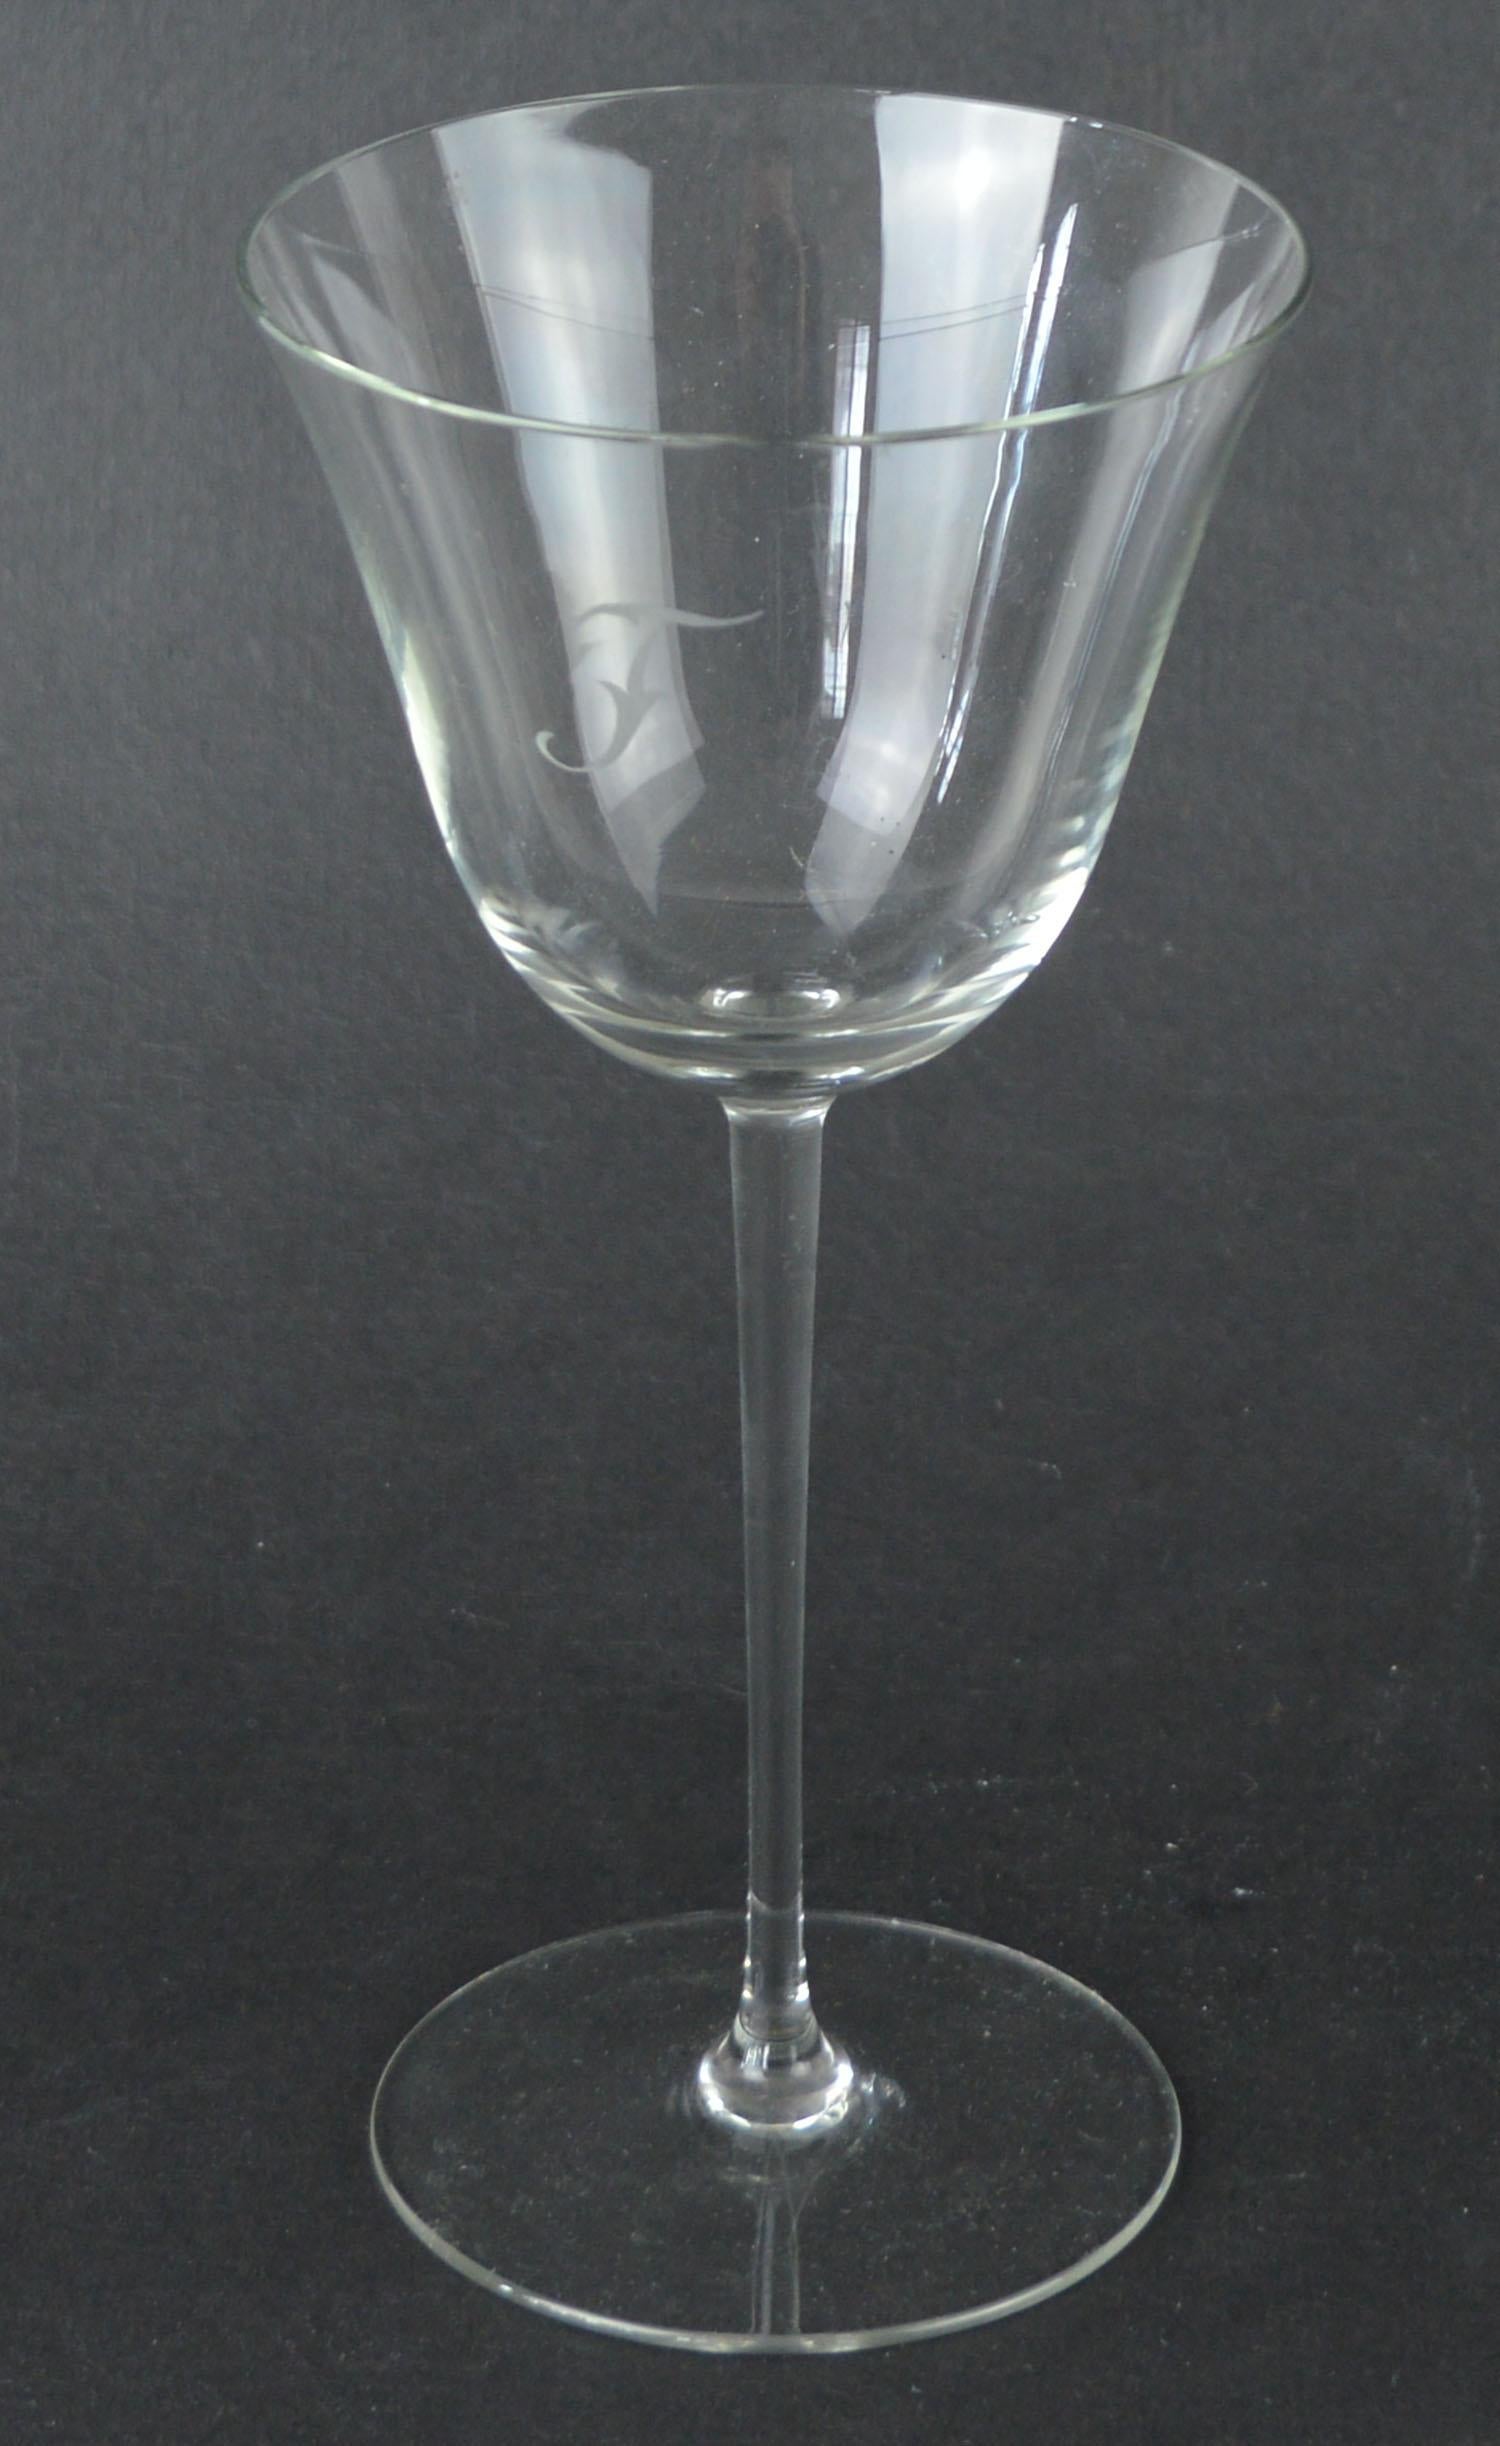 Other Set of 4 Monogrammed Art Deco Wine Glasses, English, 1920s, Initial 